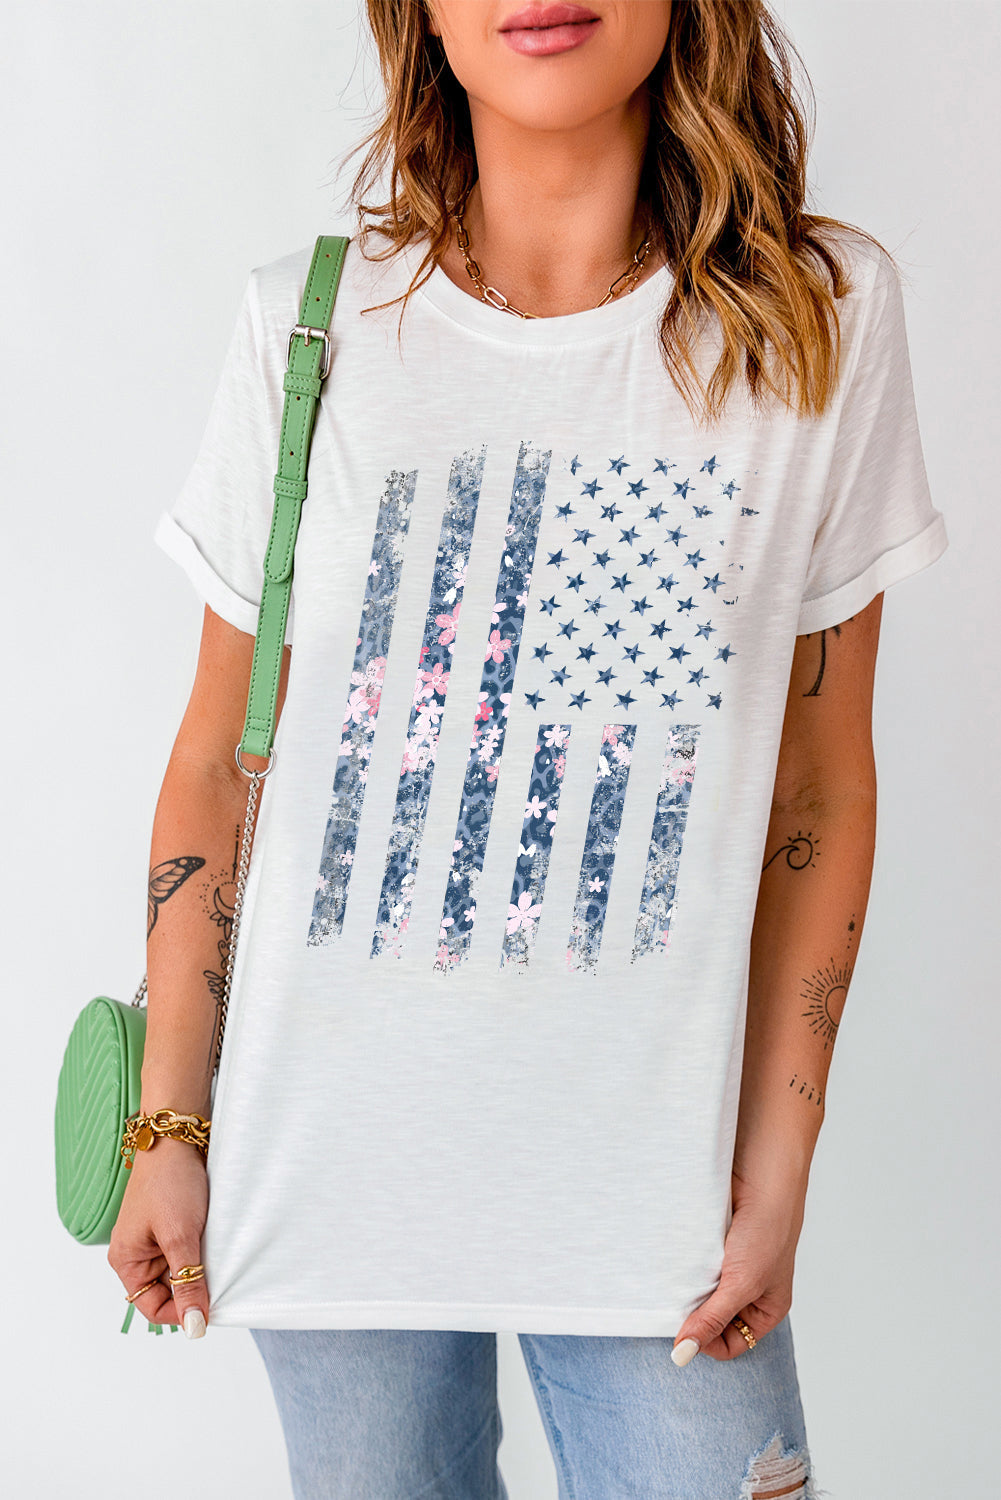 Stars and Stripes Graphic Tee - T-Shirts - Shirts & Tops - 4 - 2024